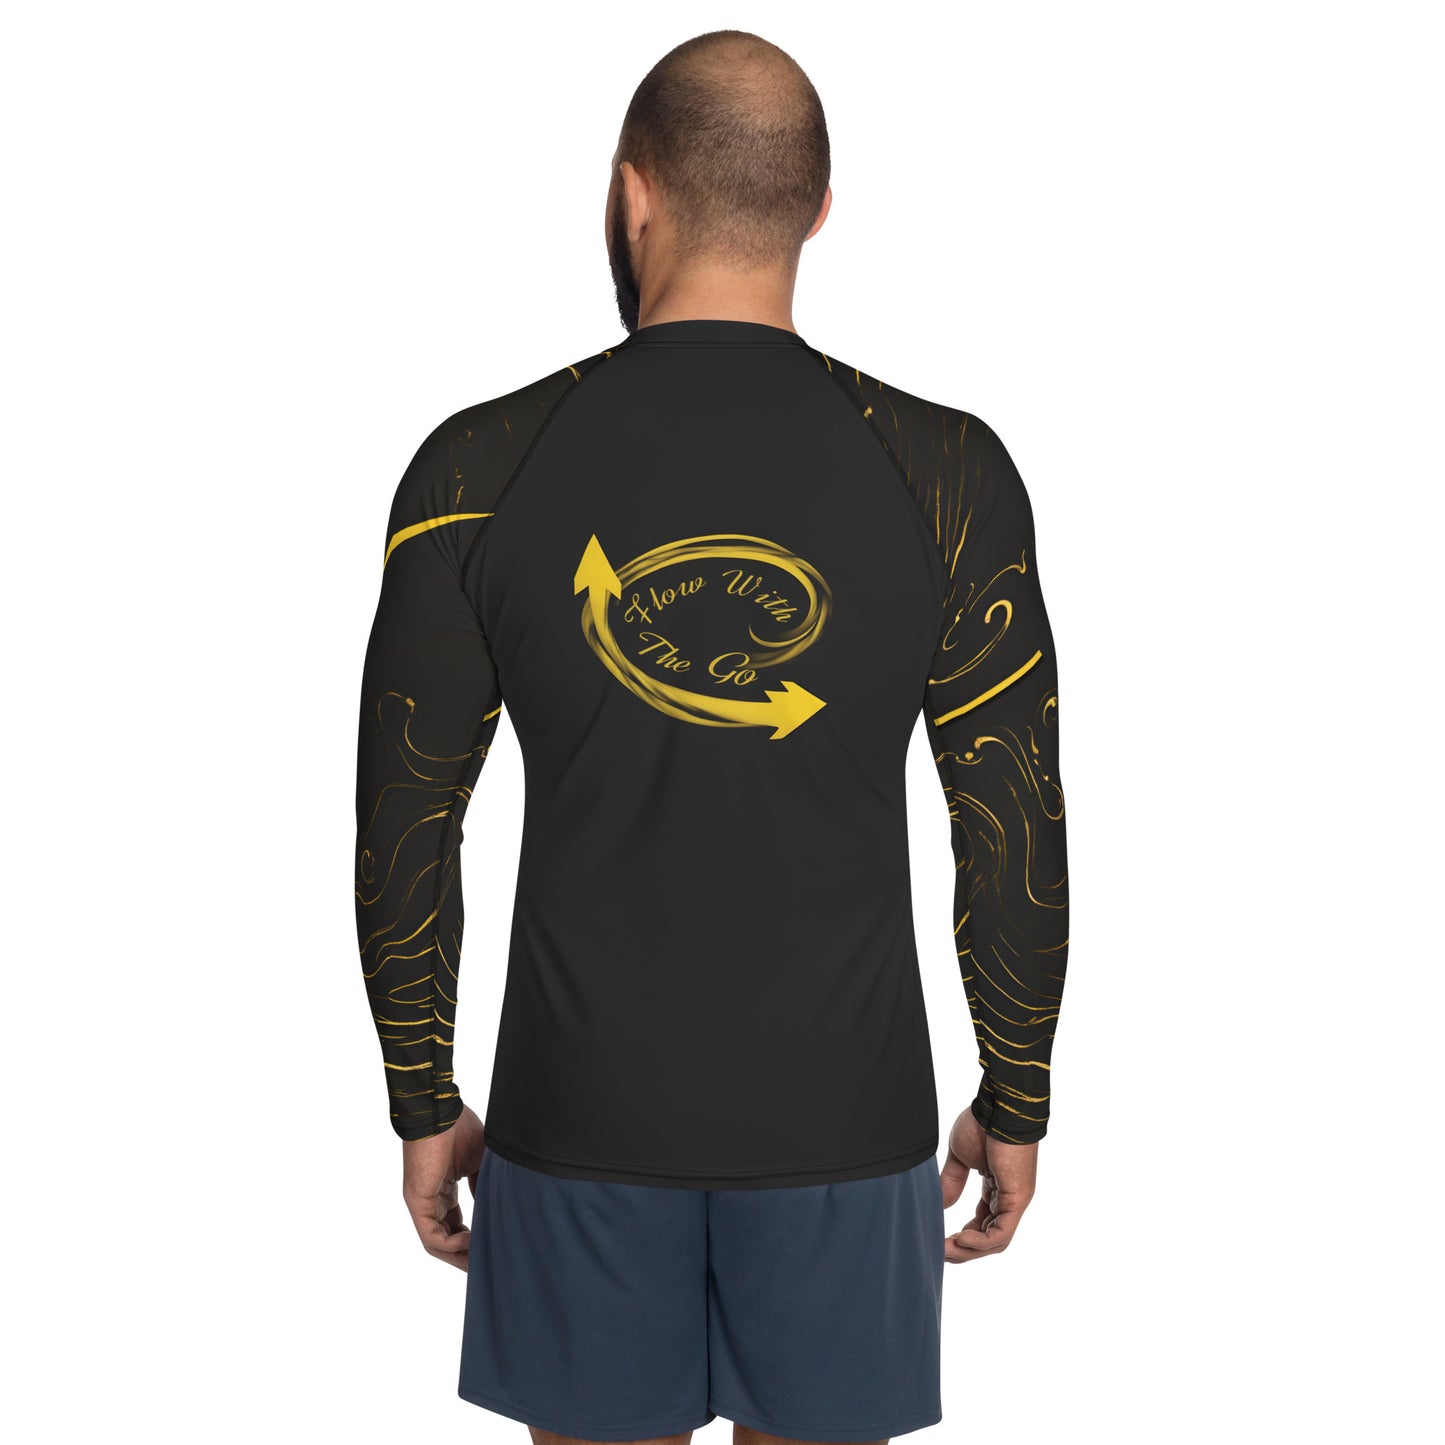 Flow With The Go 2 Rash Guard